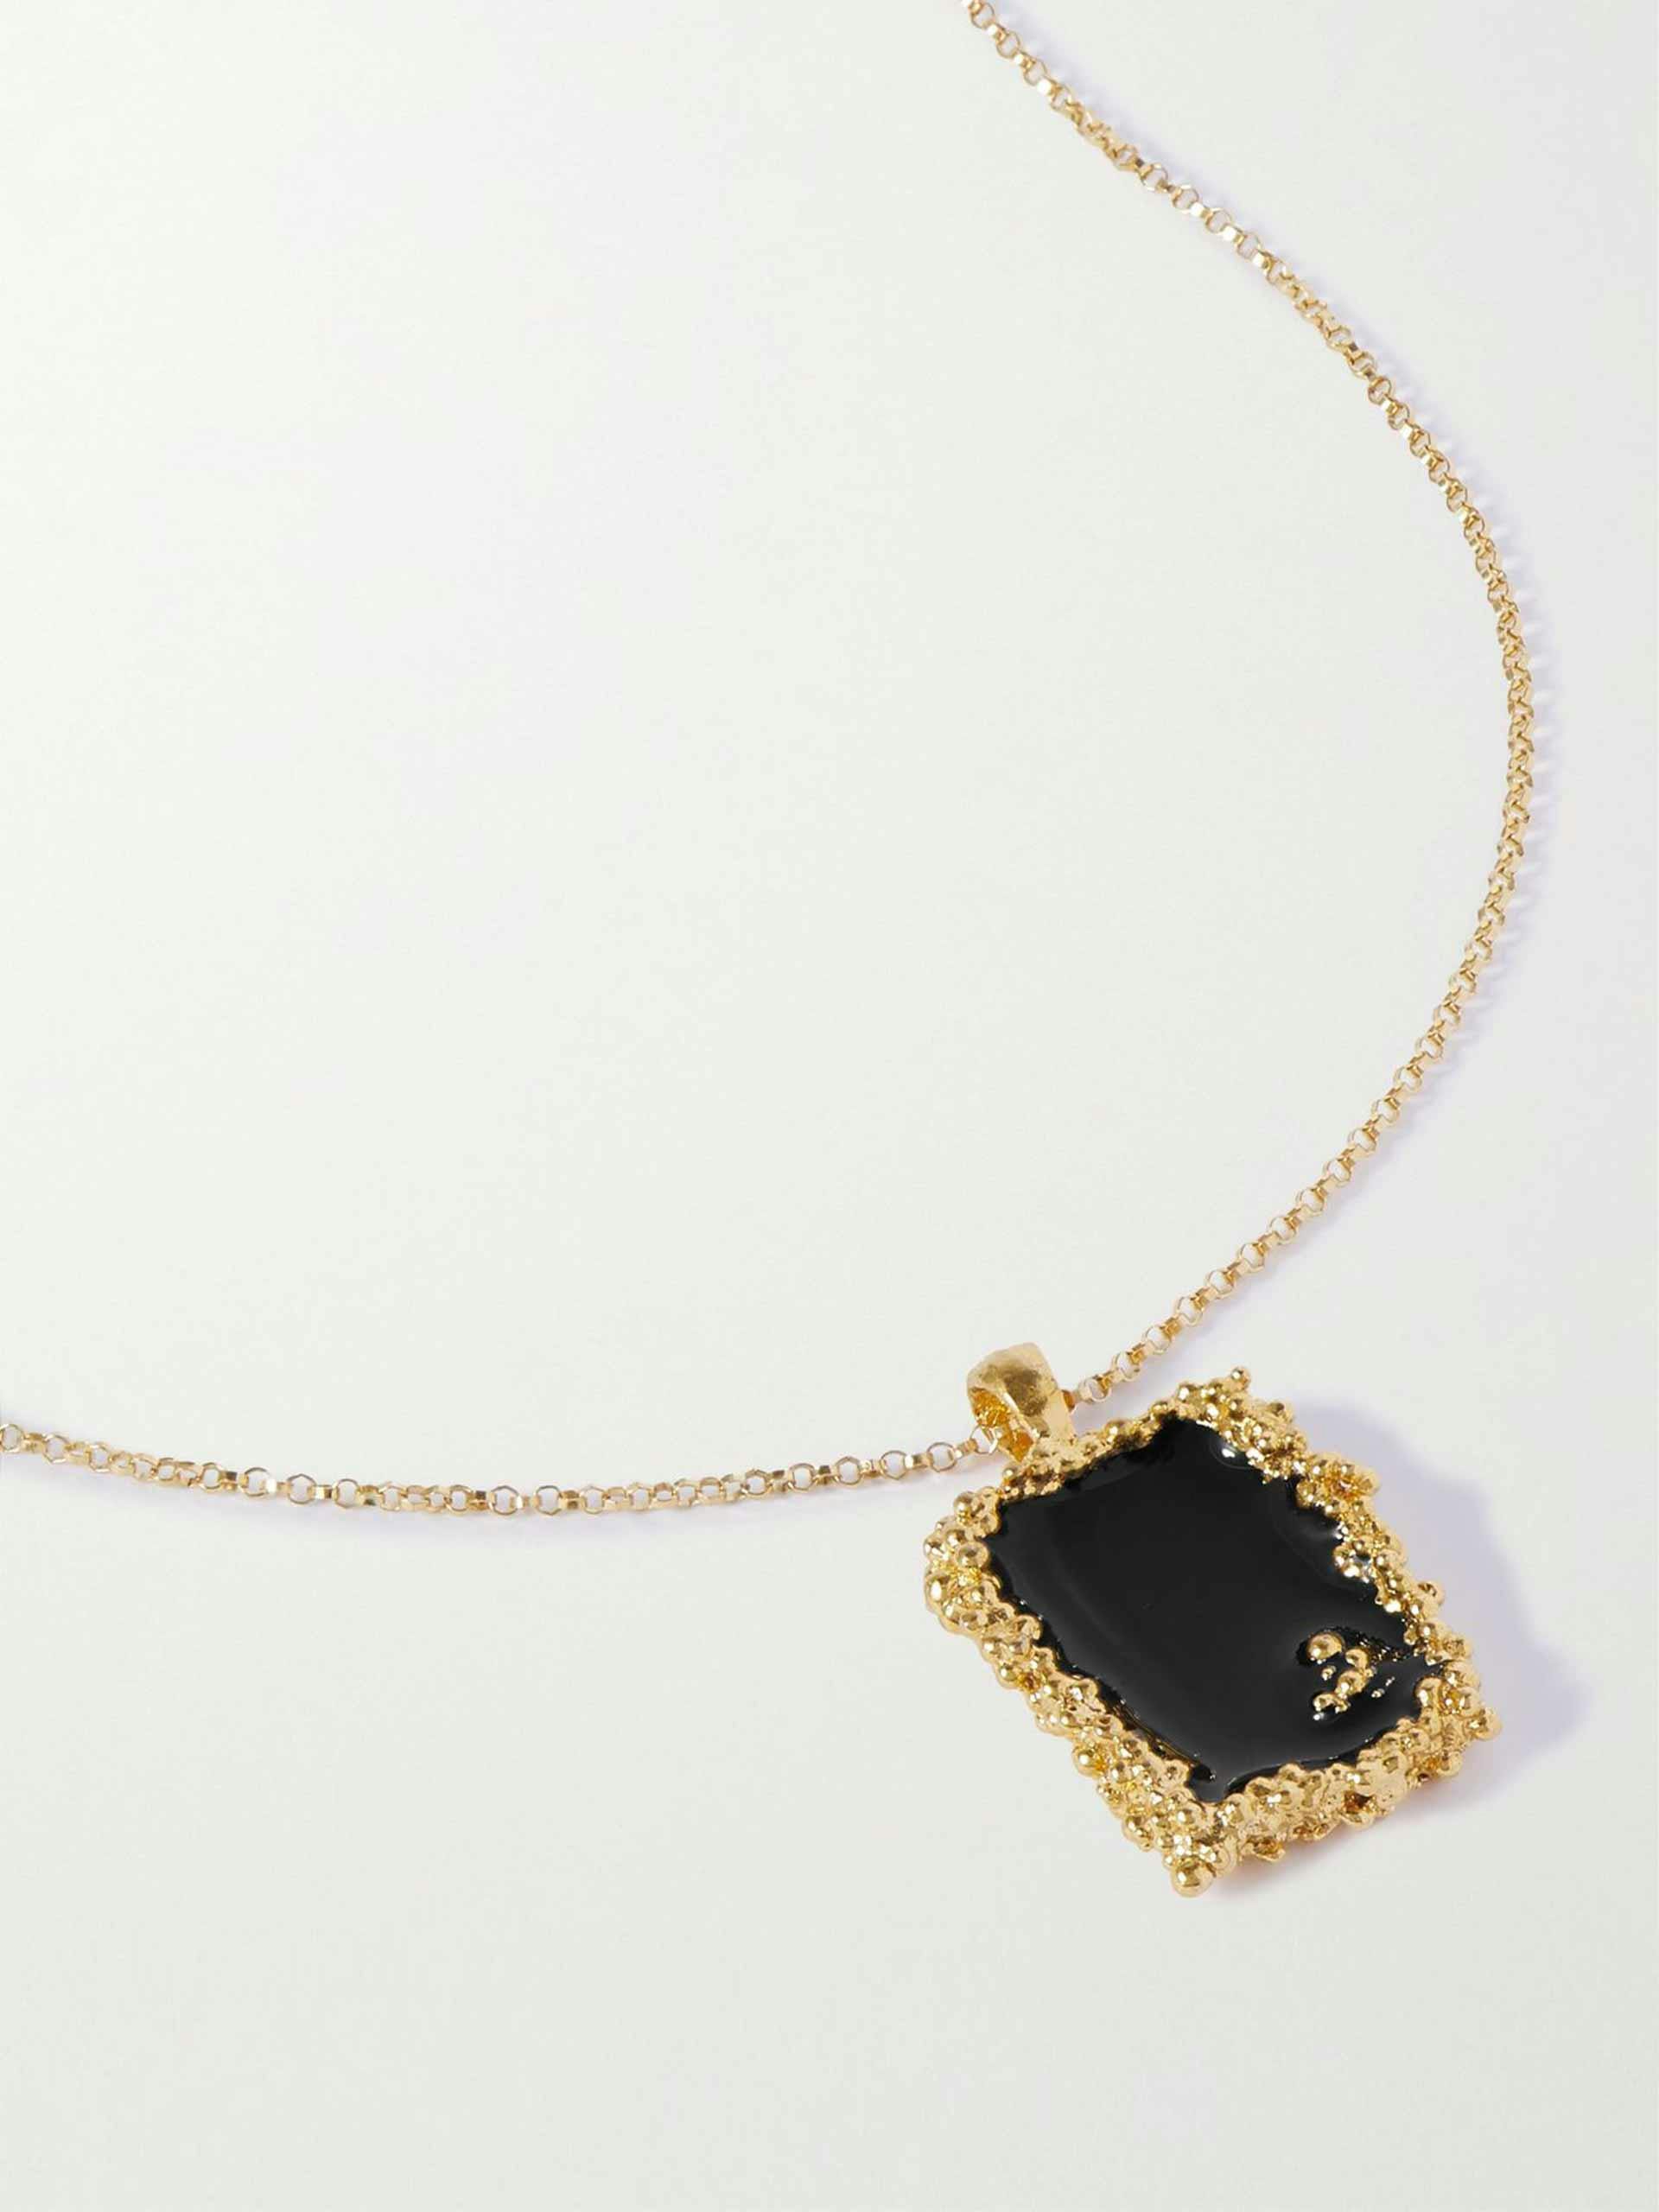 “The Inkwell Vignette” gold-plated enamel necklace